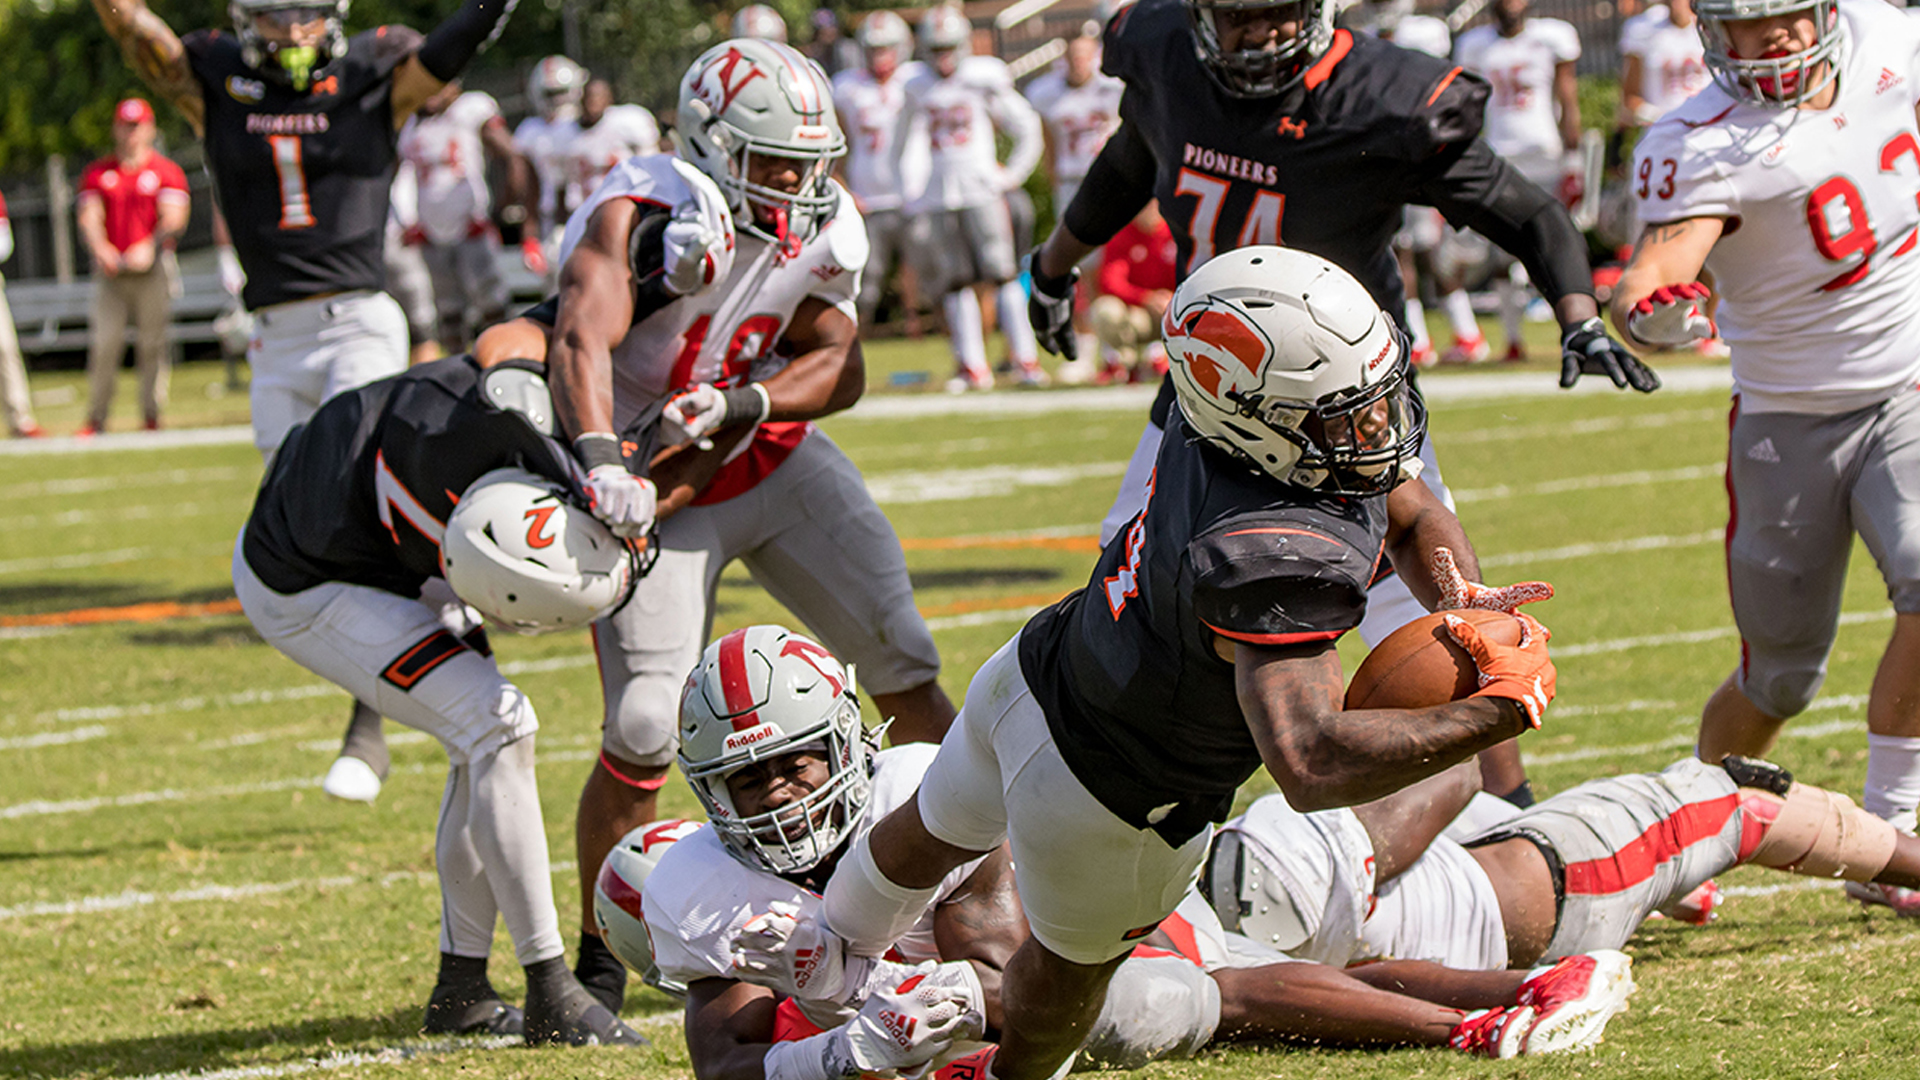 Cortney Jackson scores on this 9-yd TD run in the third quarter vs Newberry (photo by Chuck Williams)